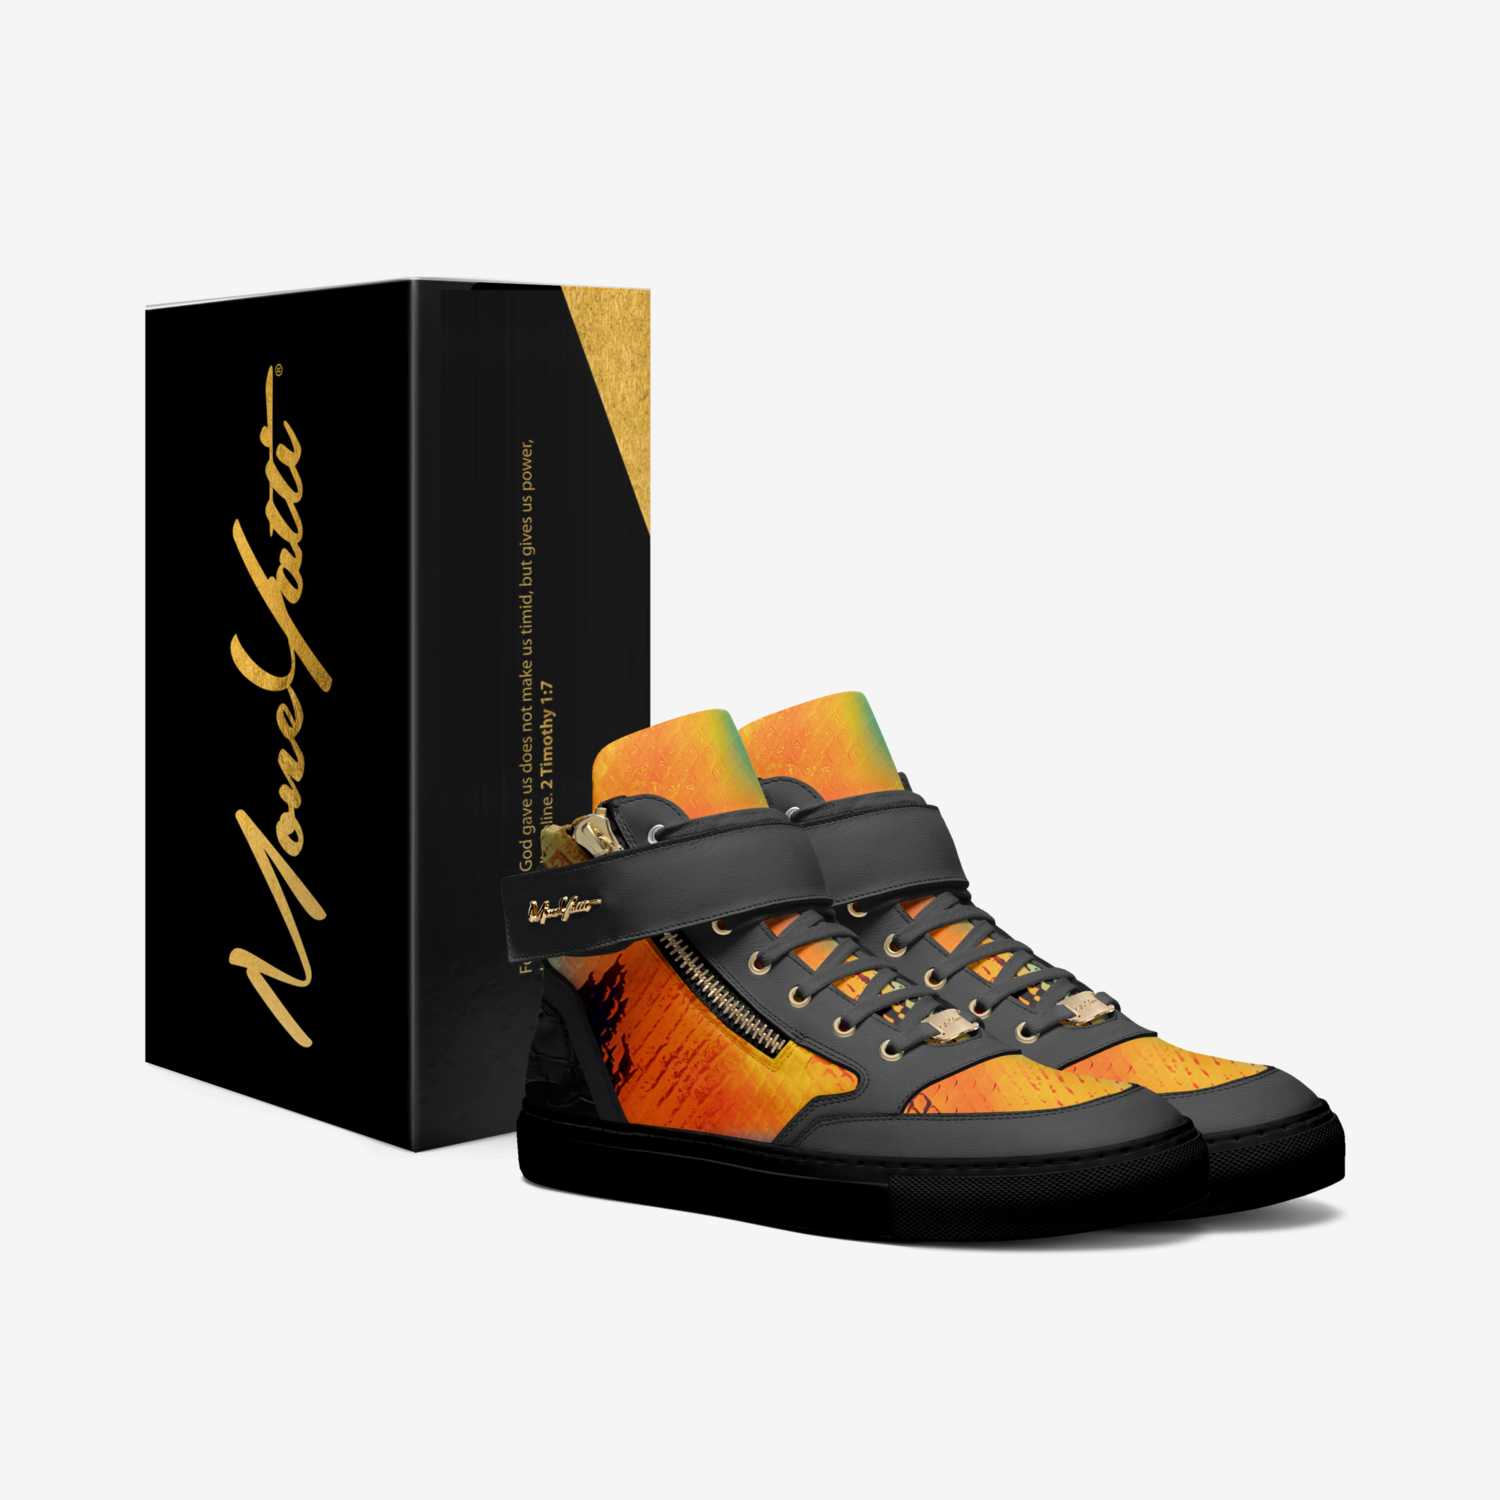 Legends01 custom made in Italy shoes by Moneyatti Brand | Box view